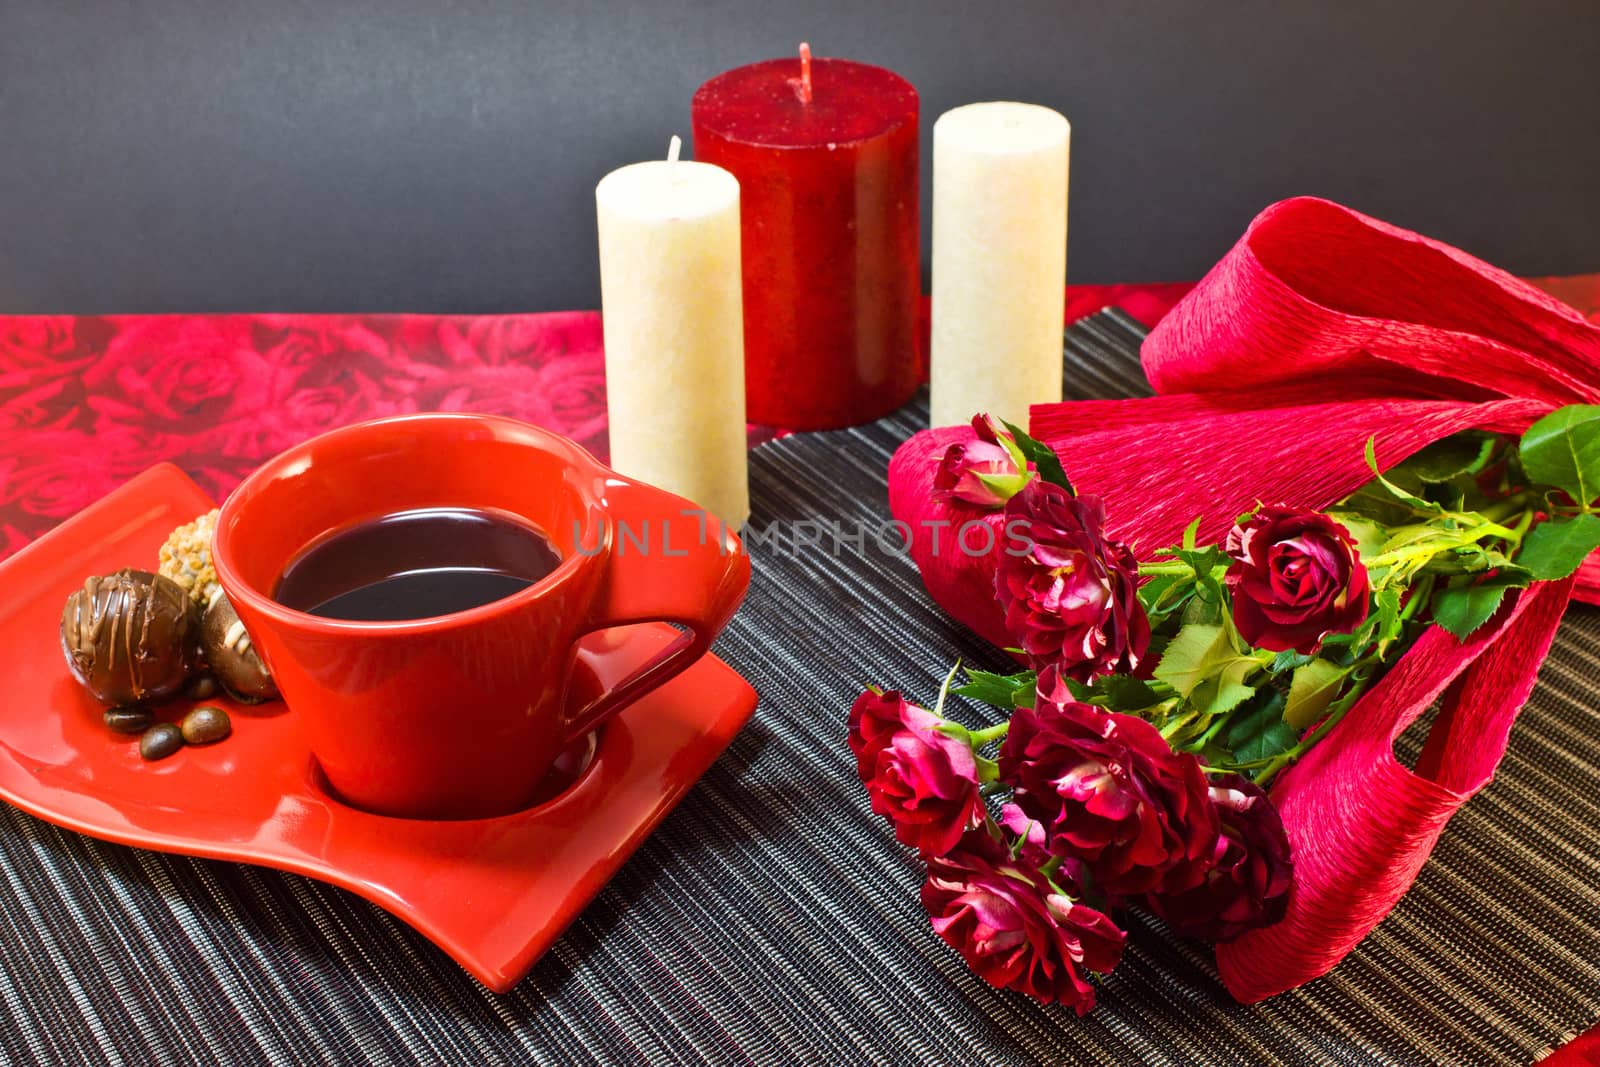 Coffee in red cup on a saucer with a chocolate and a bouquet of roses